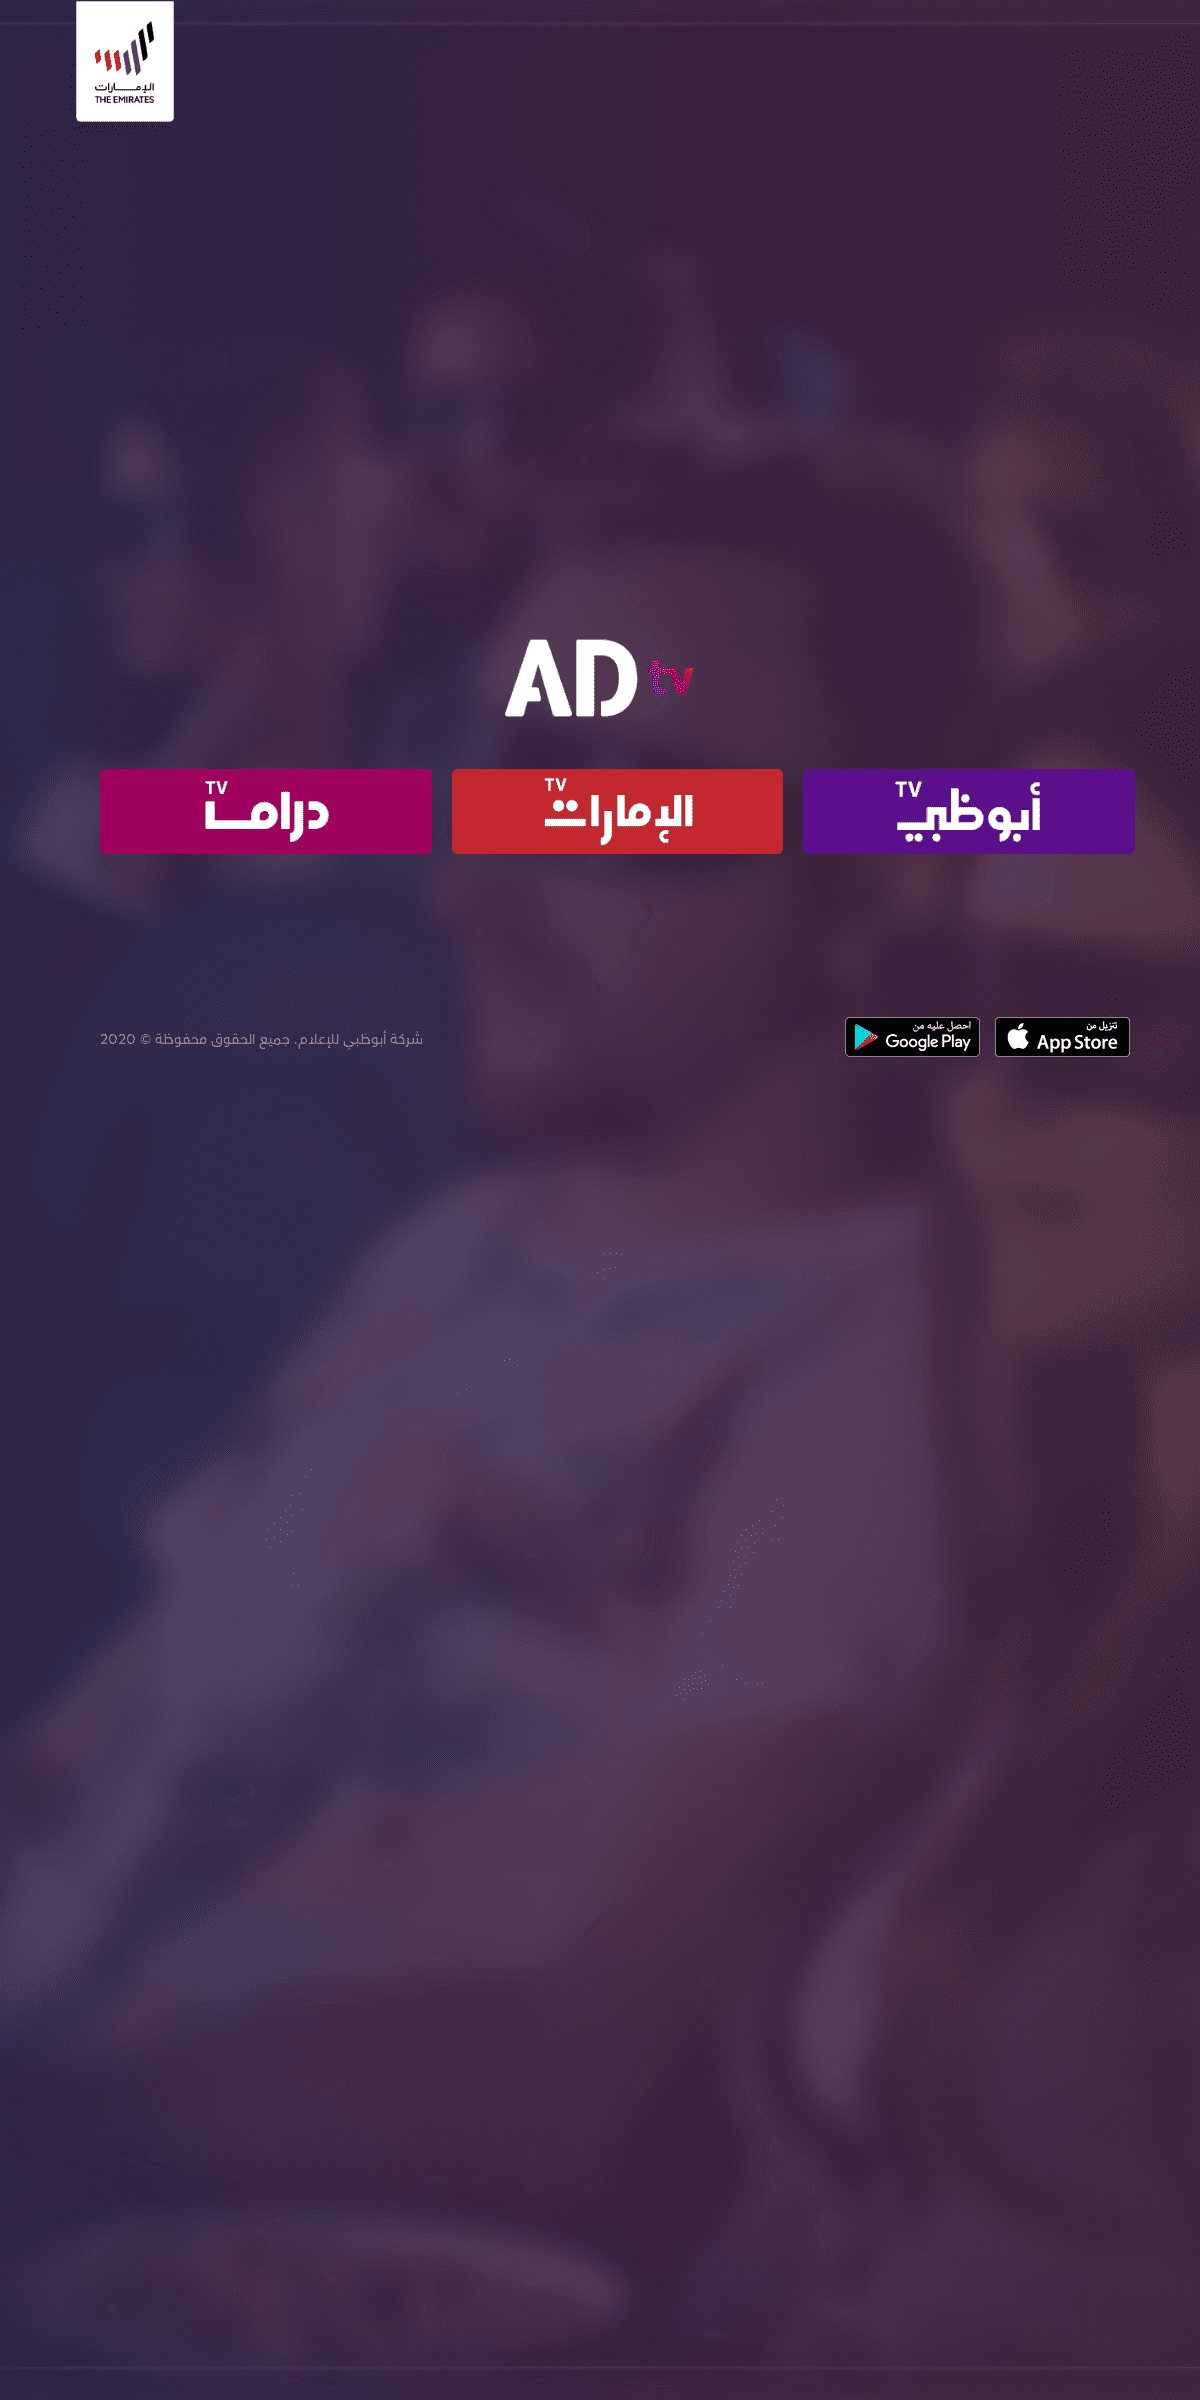 A complete backup of adtv.ae